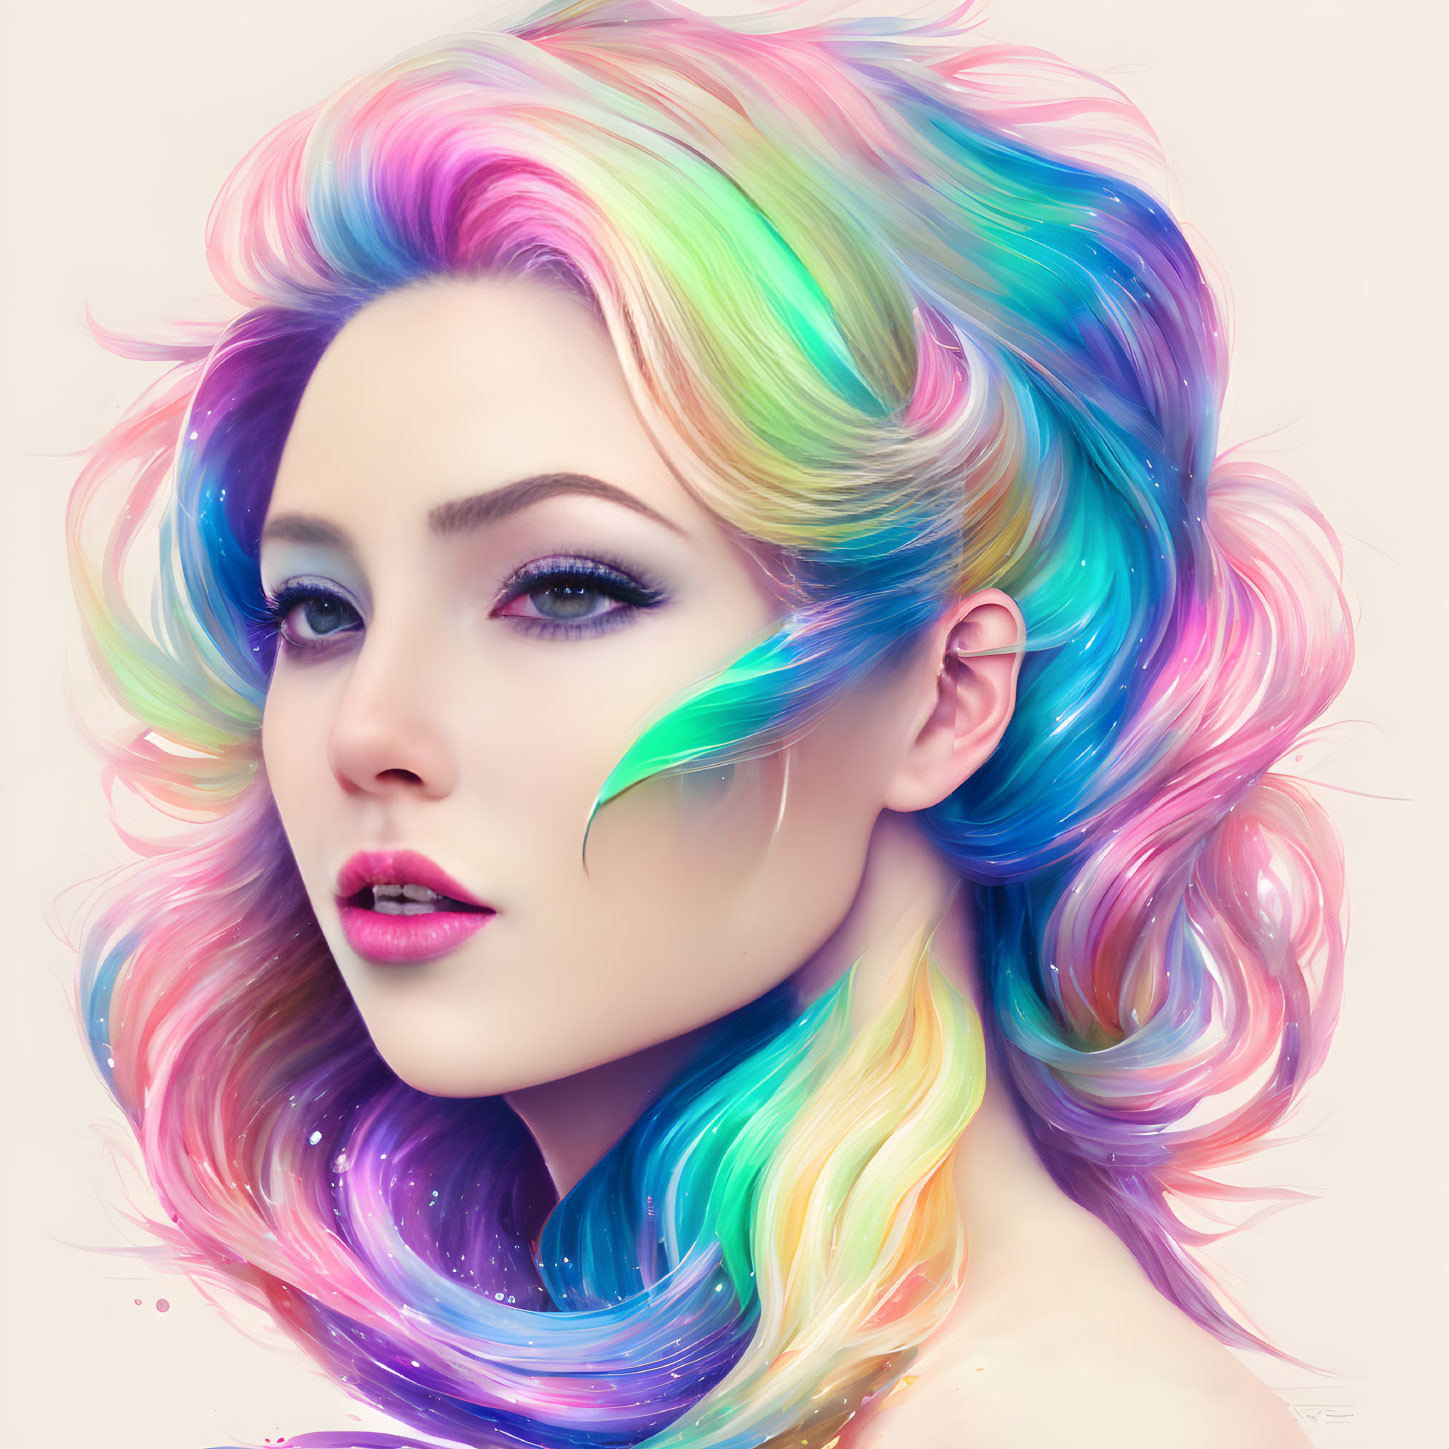 Multicolored wavy hair and blue eyes in pastel rainbow portrait